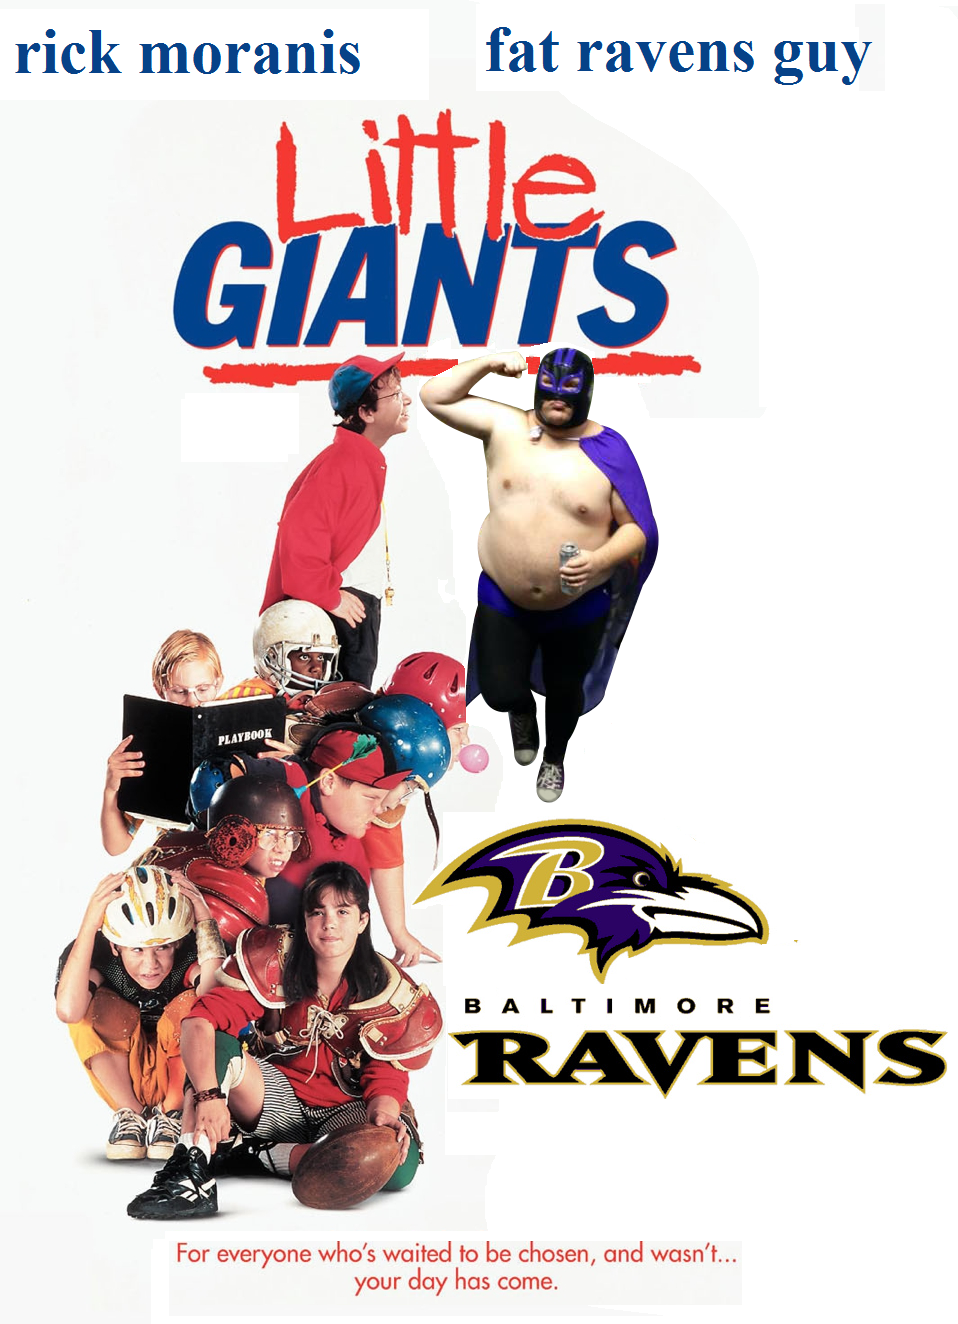 For everyone who's waited to be chosen, and wasn't...
your day has come. Little Giants Vs Fat Ravens Guy.